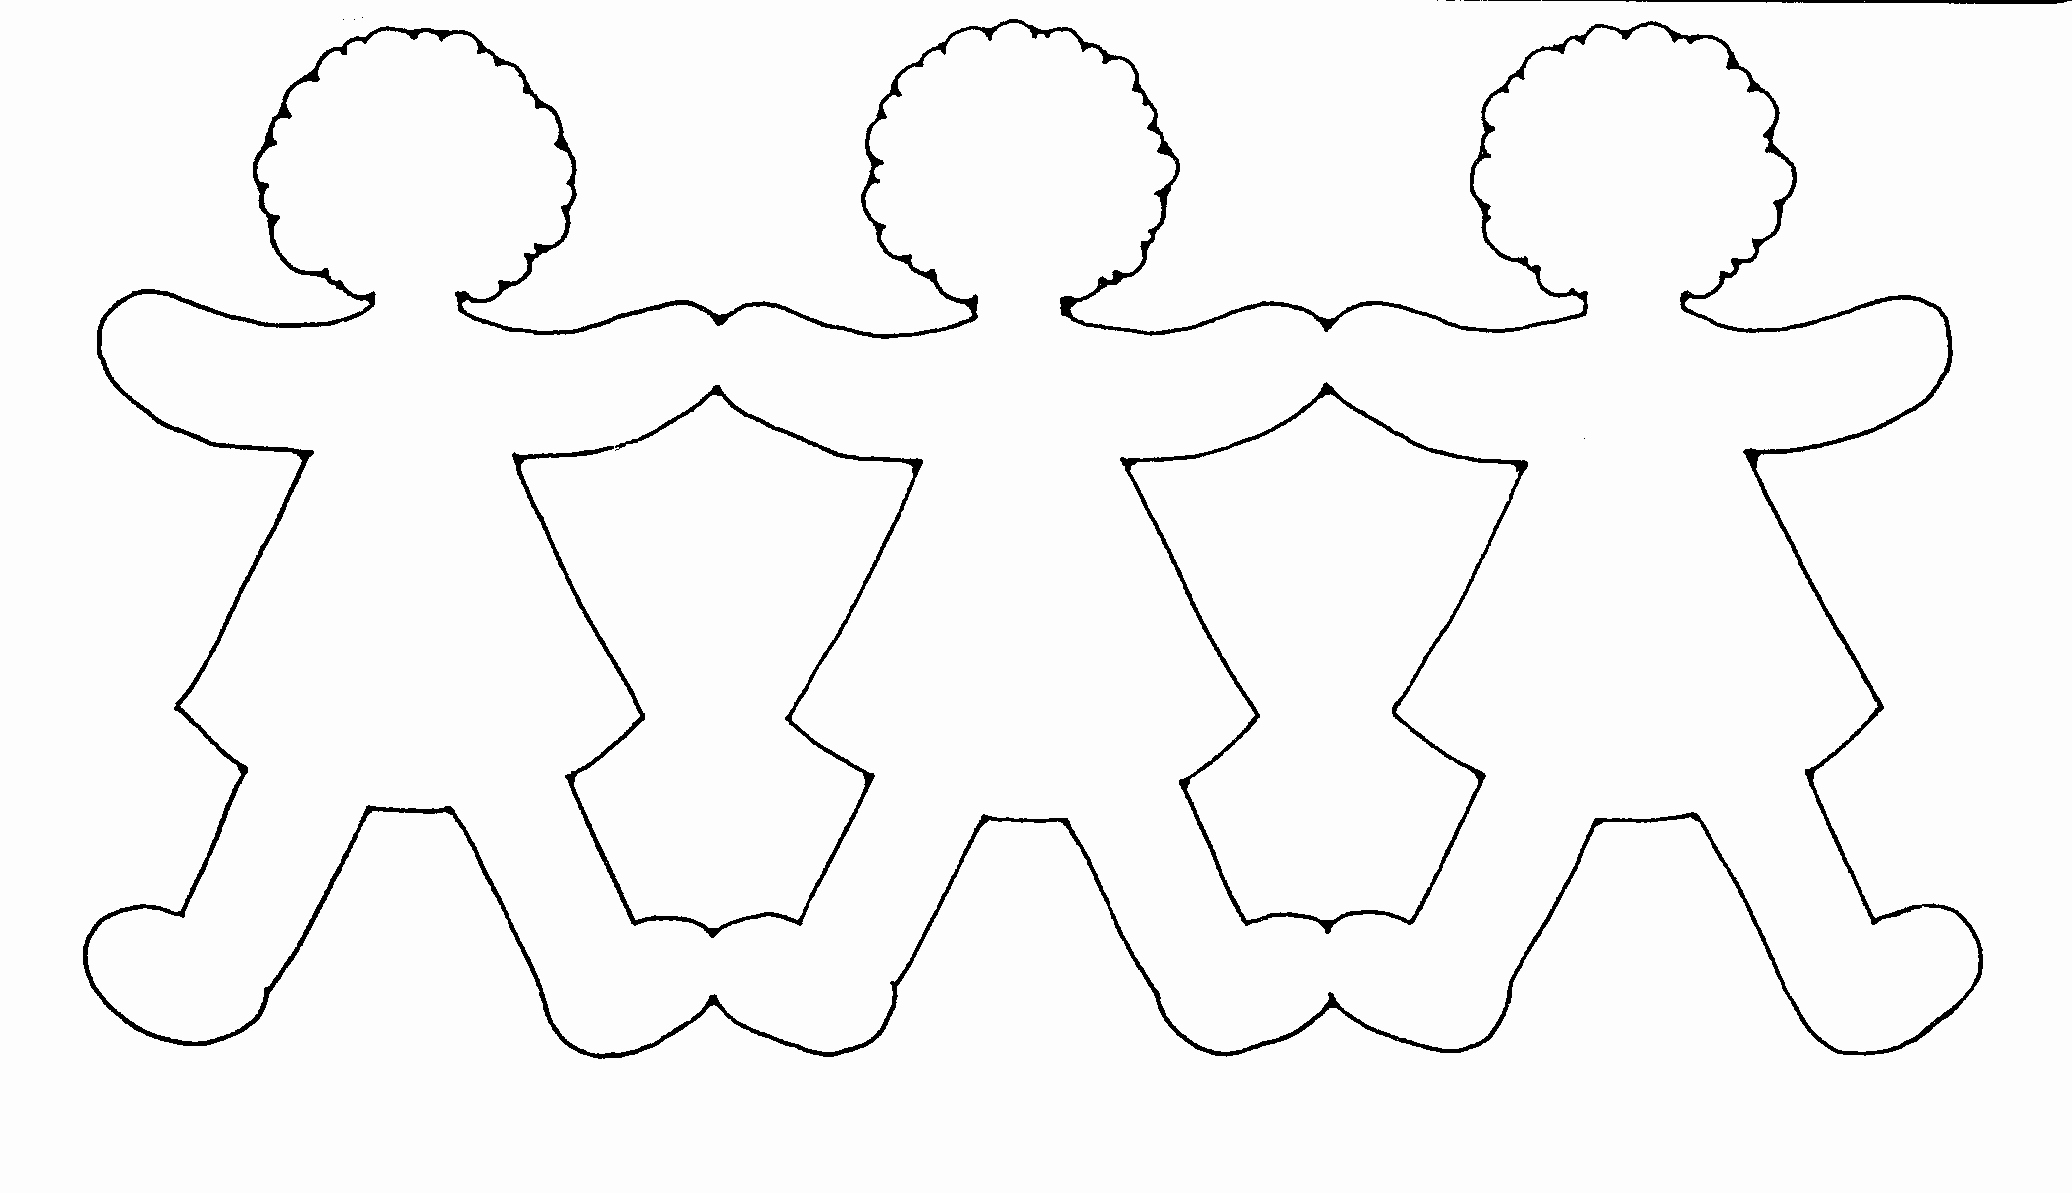 Paper Cut Outs Templates Inspirational Paper Doll Chain Template Craft …